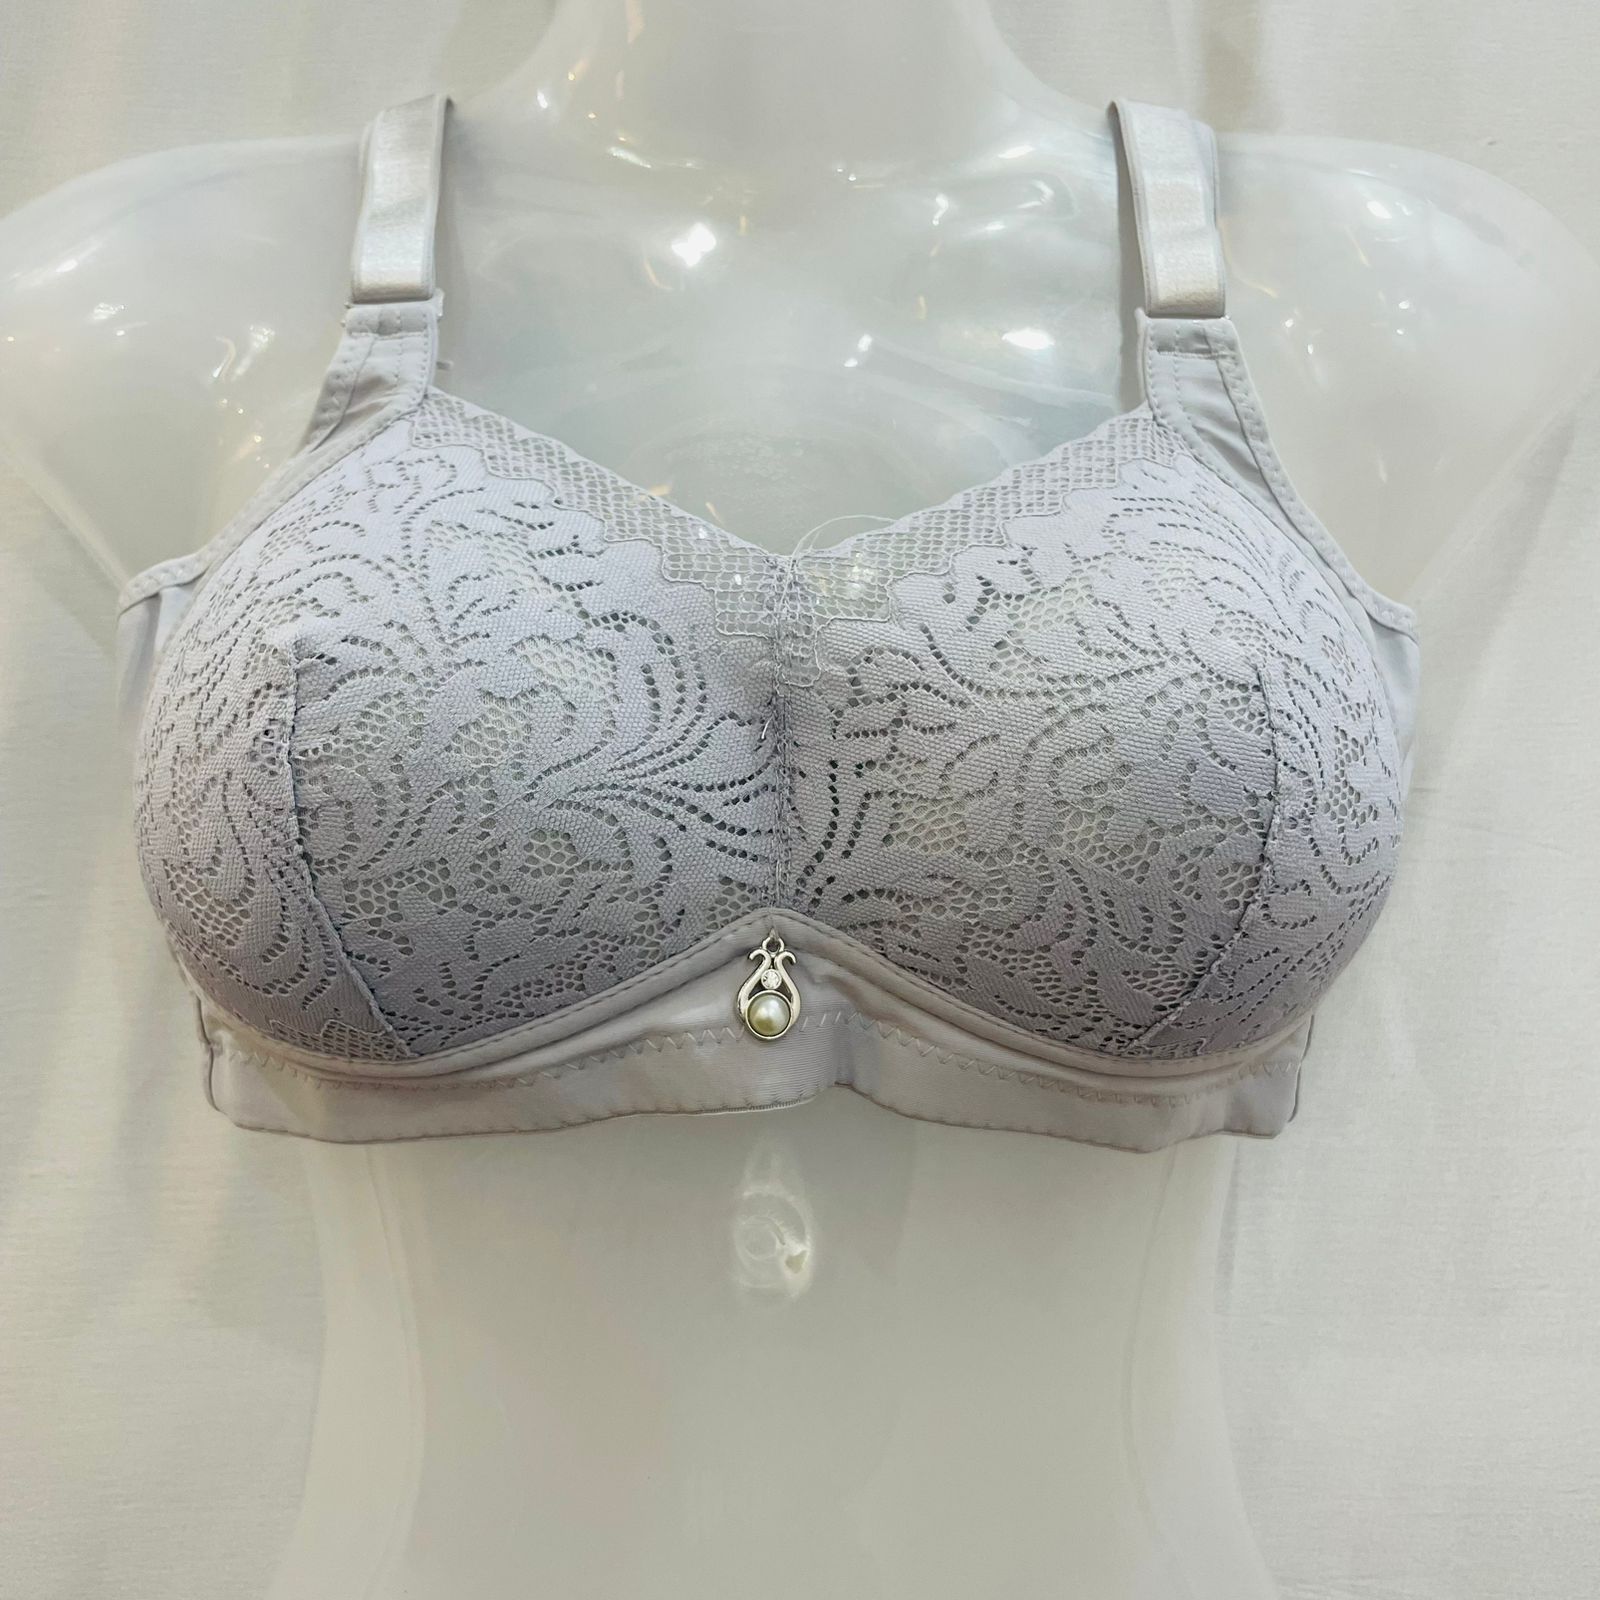 Buy Lightly Padded Non-Wired Bra For Women's Online in Nepal